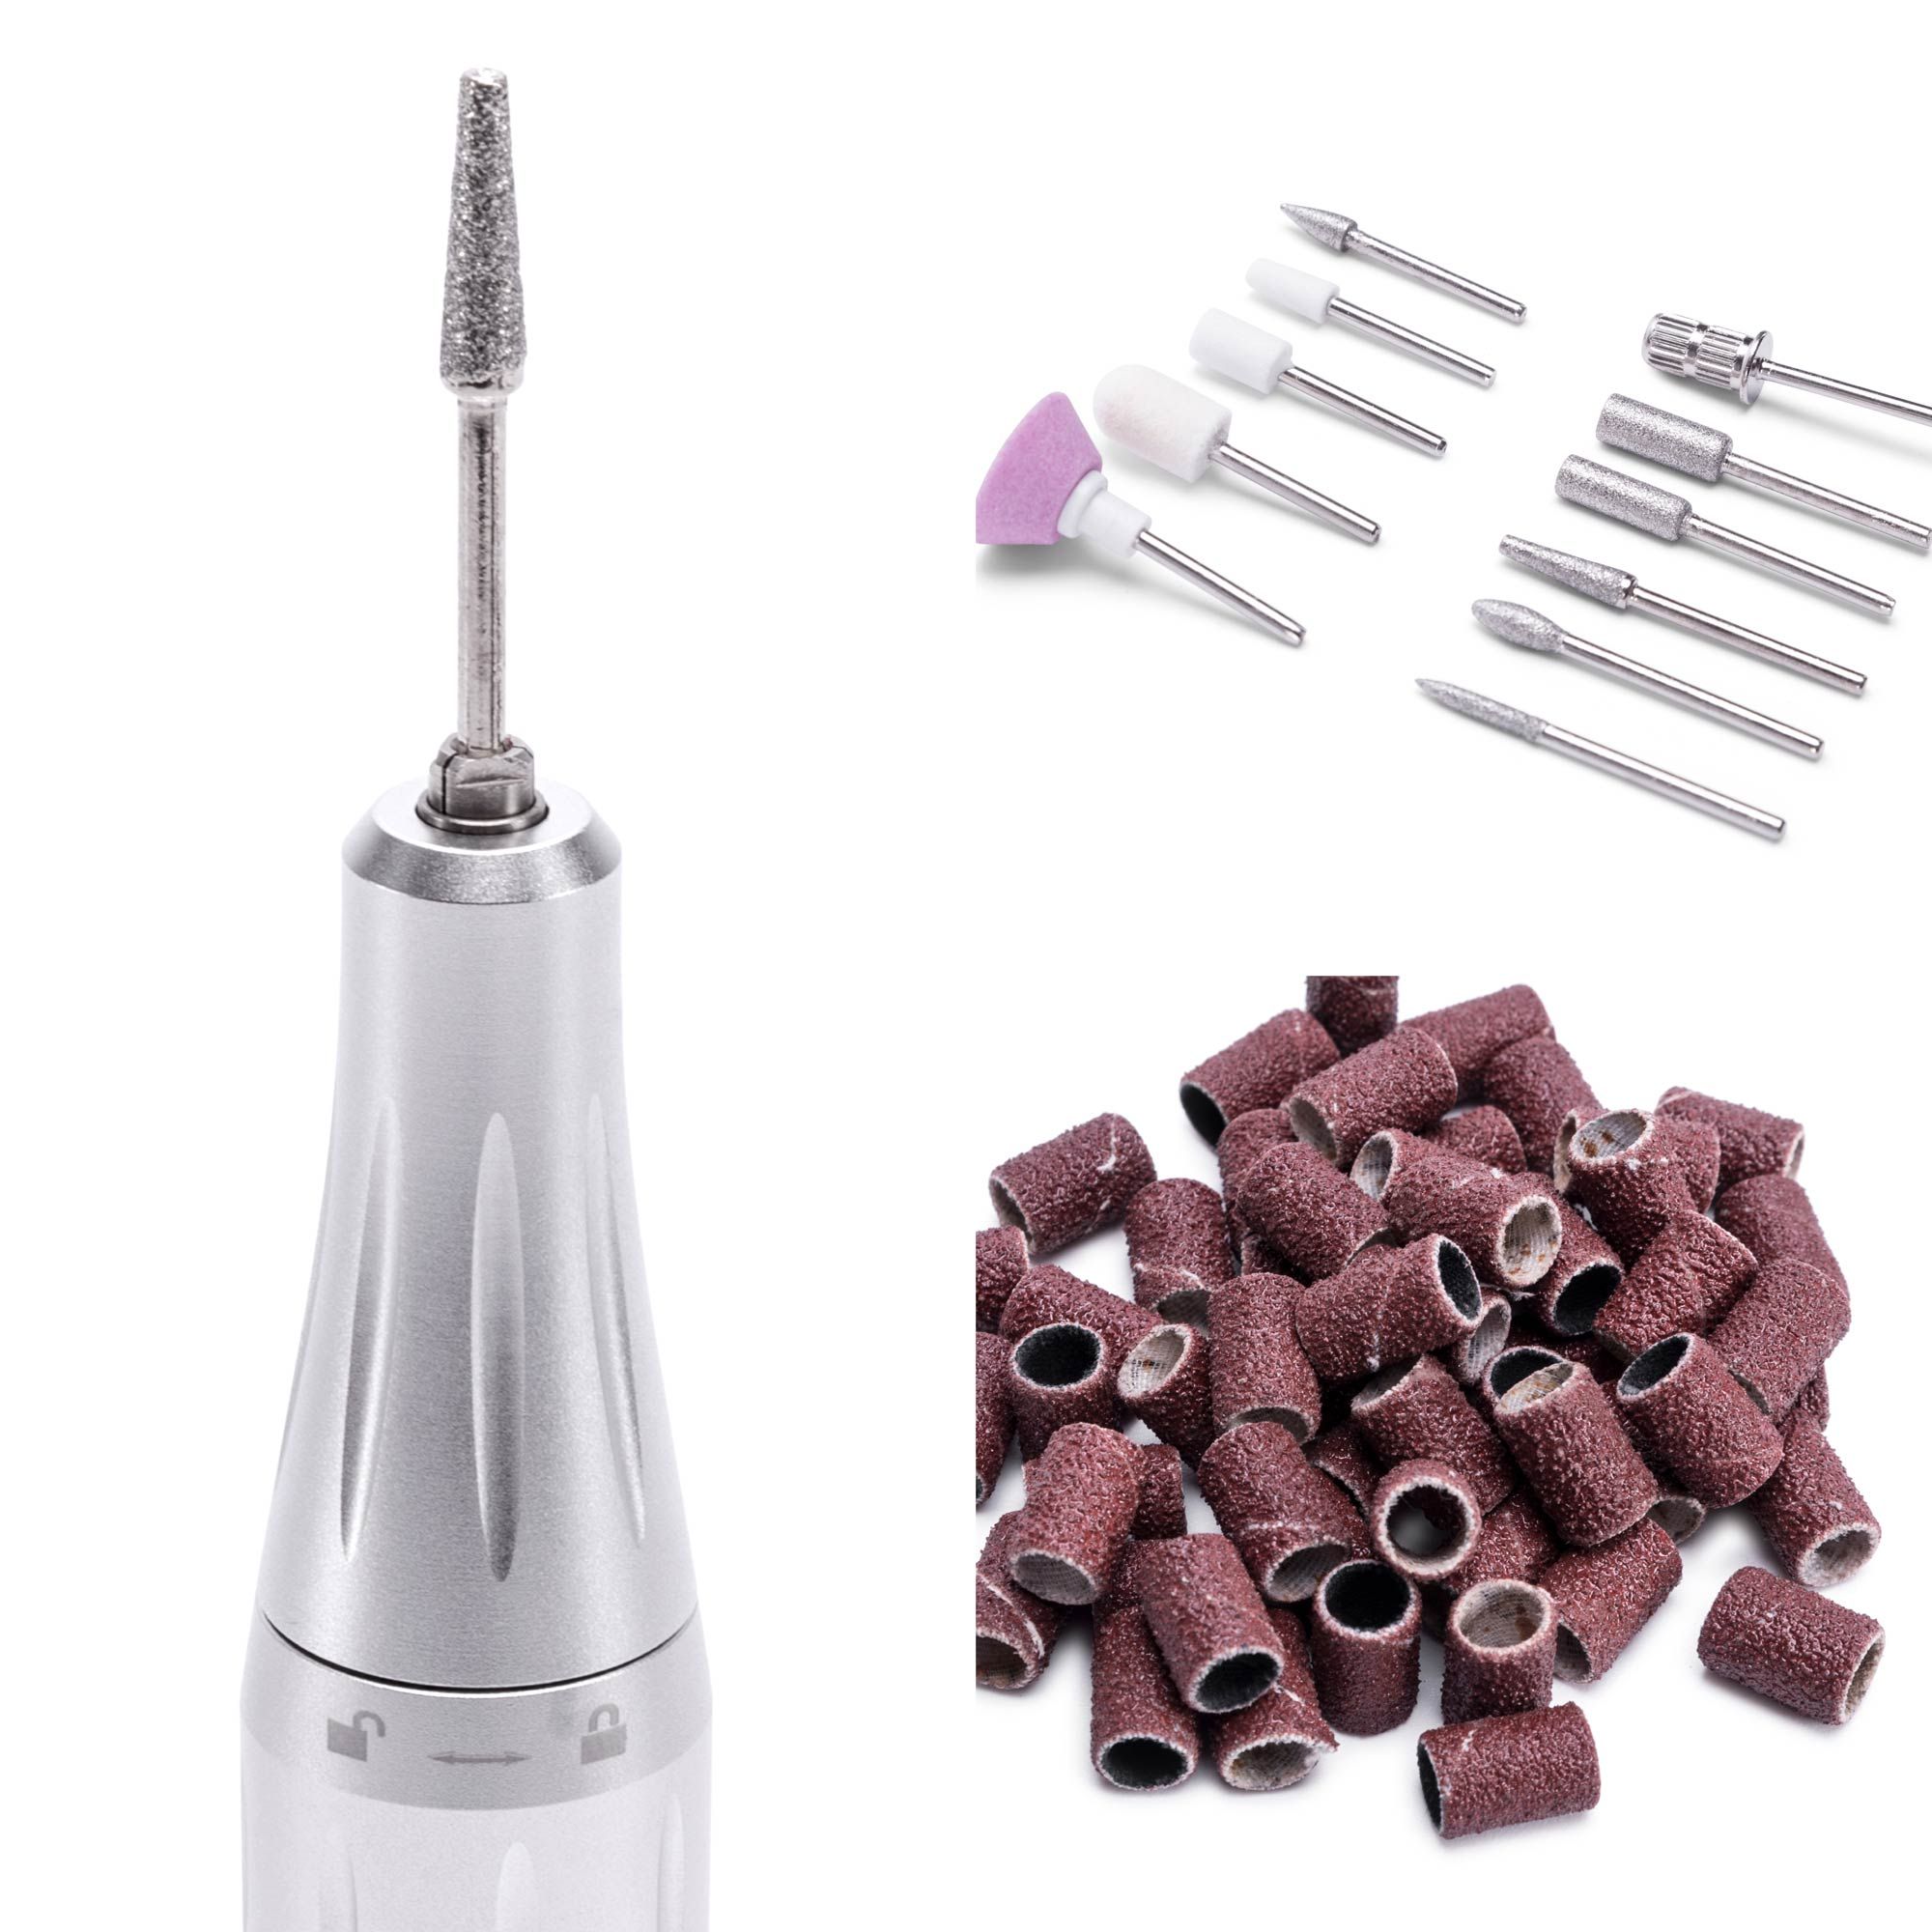 Various electric nail file tools and bit in use